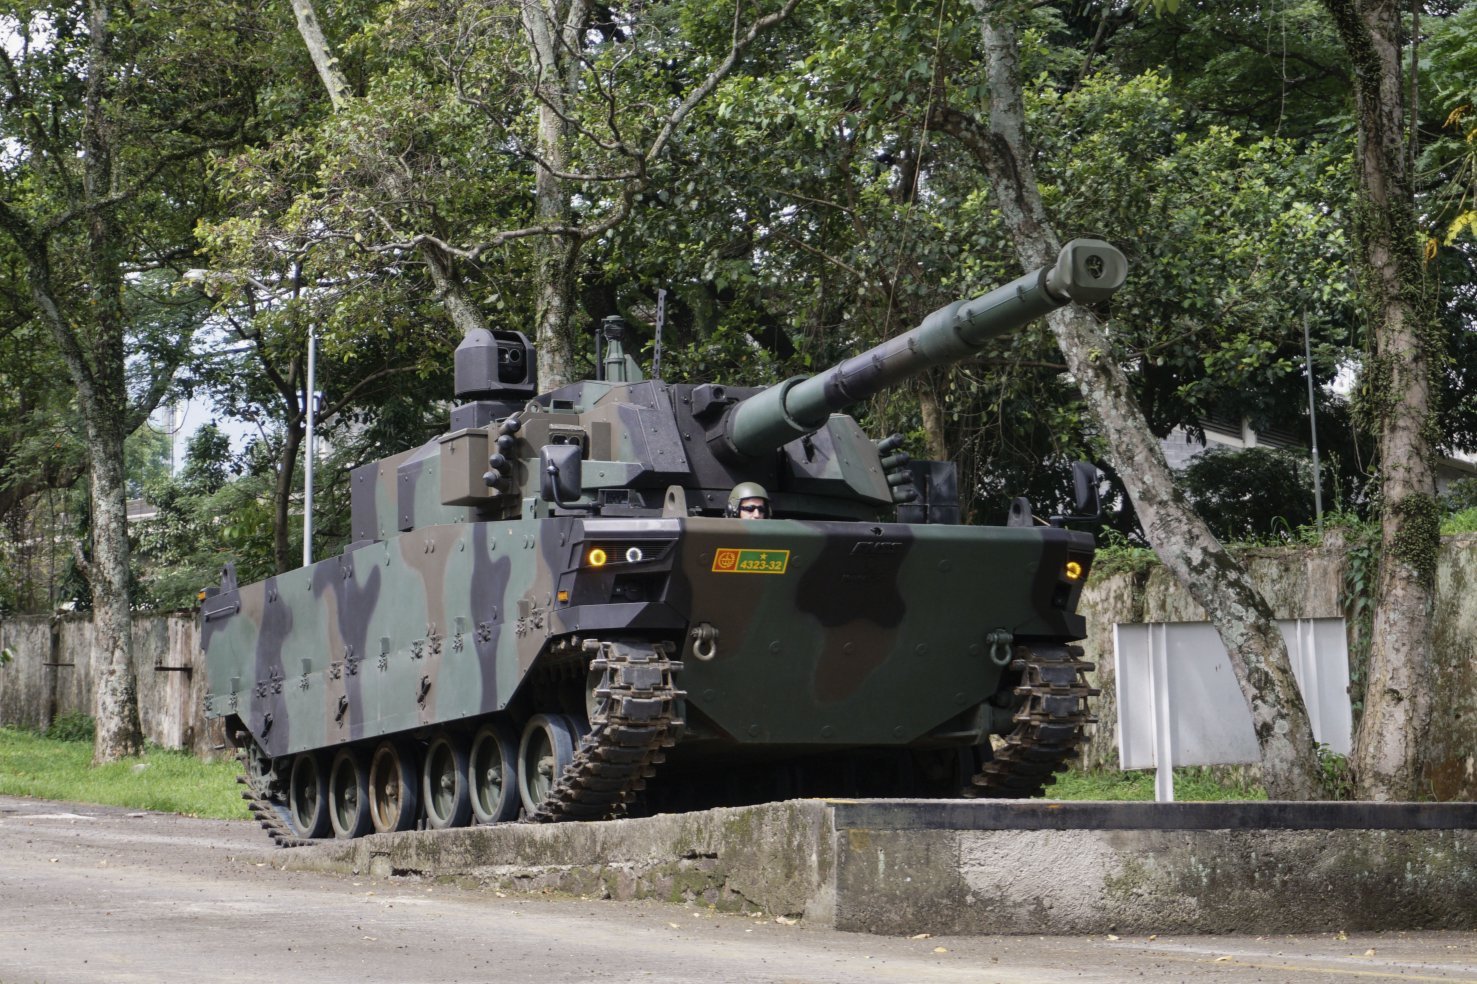 The Indonesian MoD signed an LOI with PT Pindad on 12 April reaffirming its interest in acquiring Kaplan MT tanks (similar to this one). (FNSS)